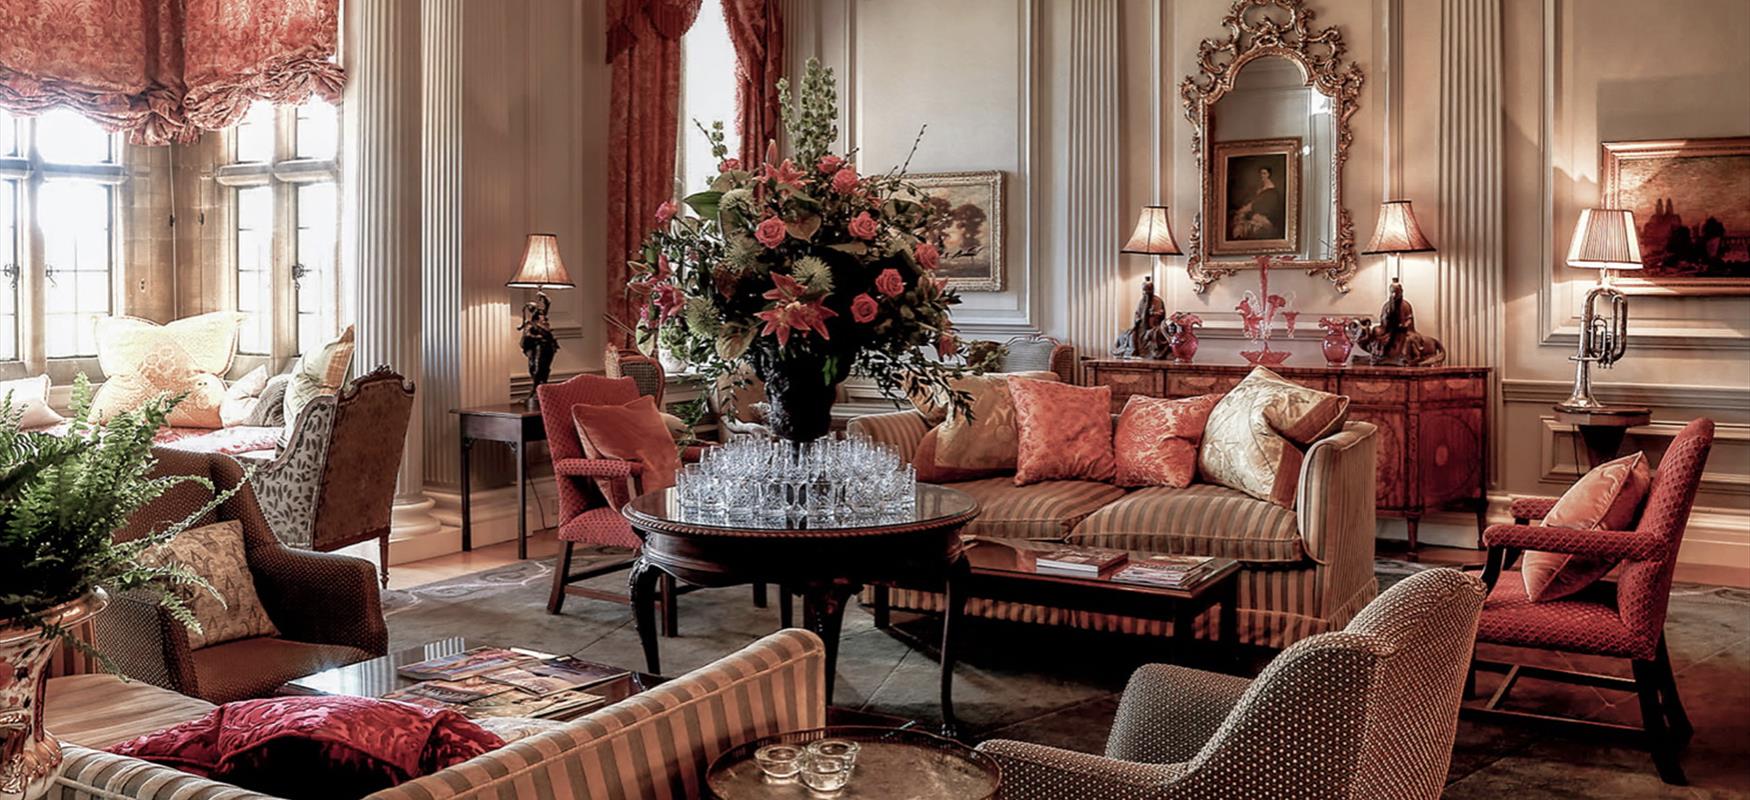 Stapleford Park Country House Hotel - The Drawing Room